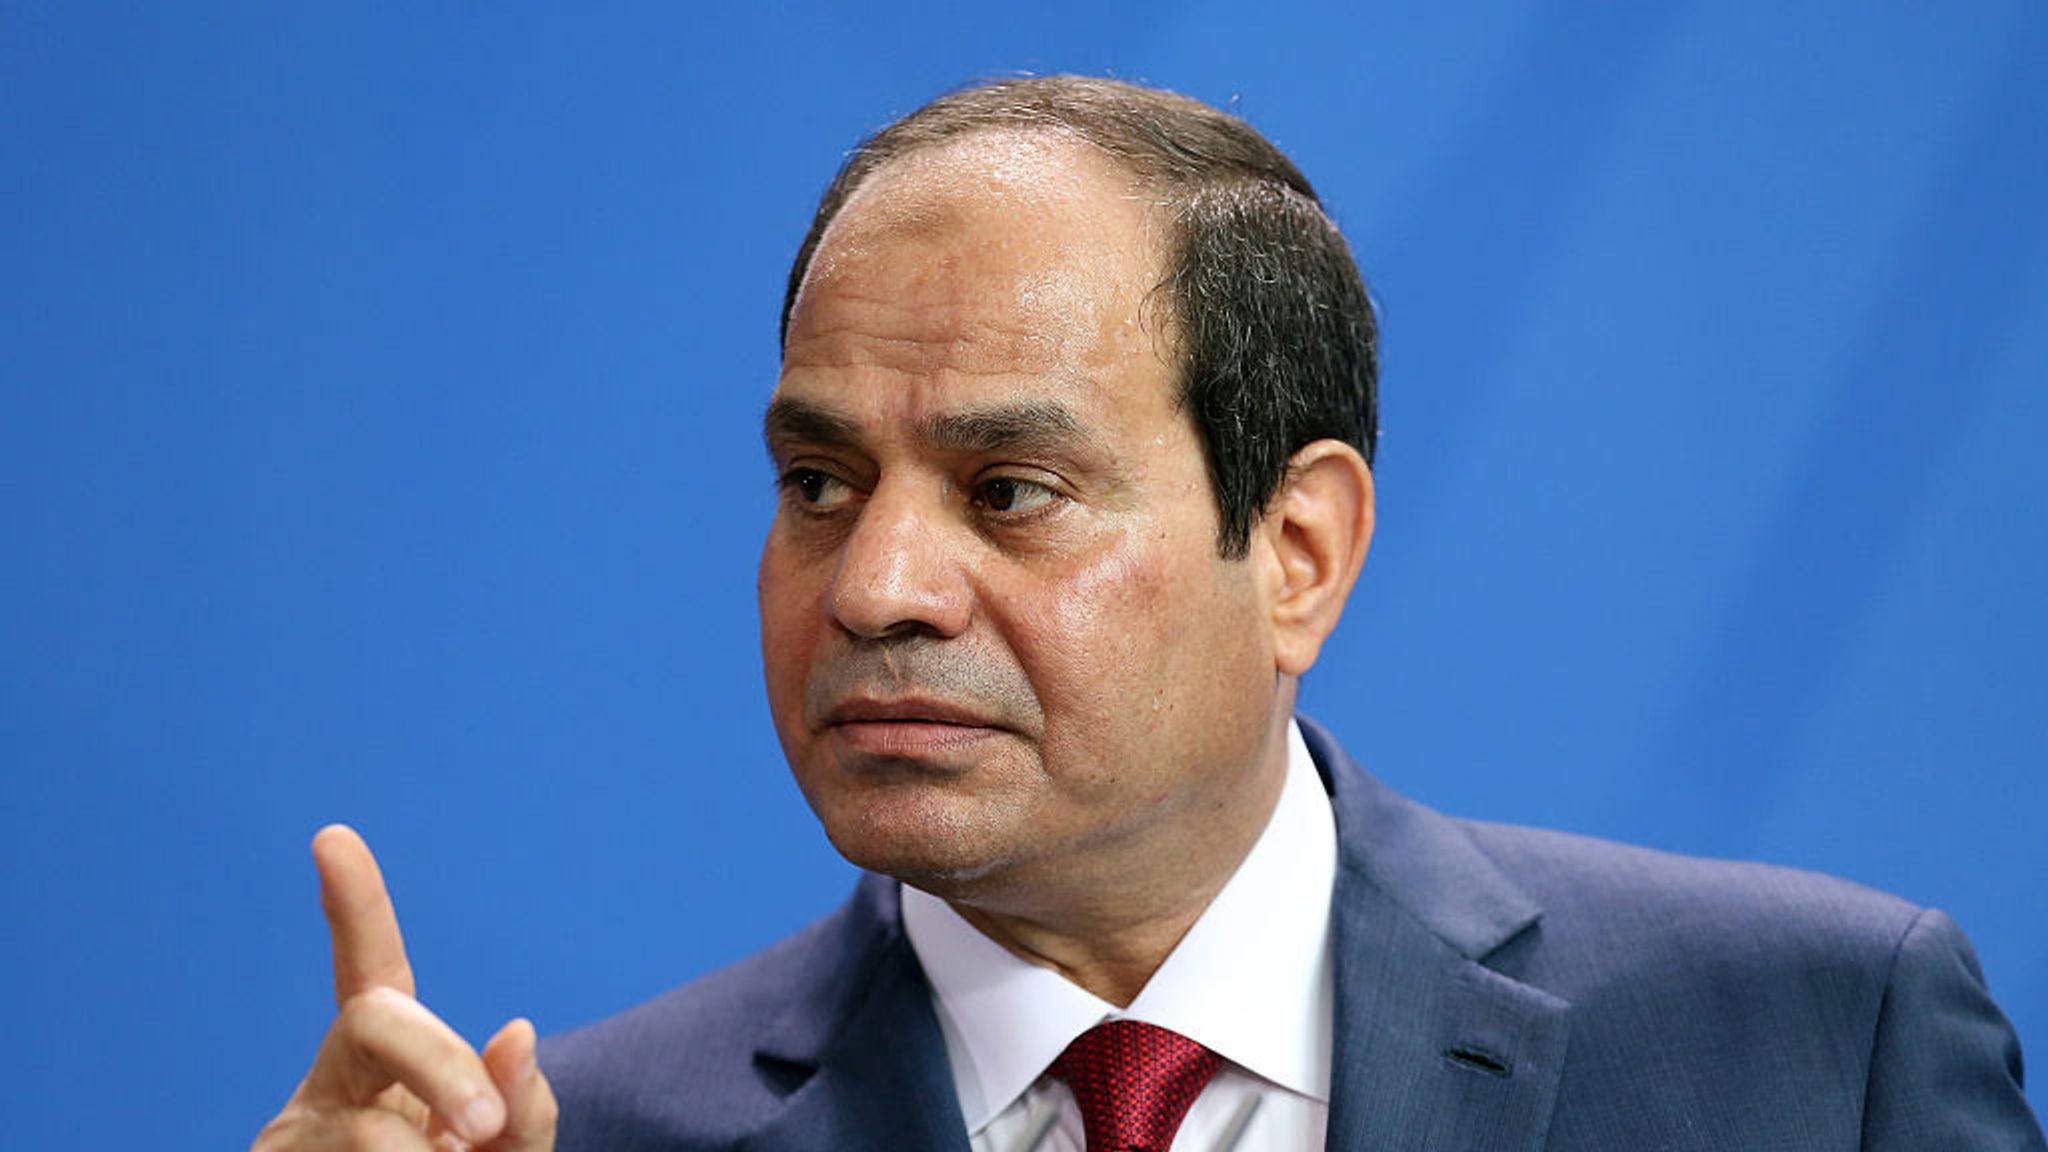 Egypts President Accused Of Fat Shaming In Obesity Rant World News 